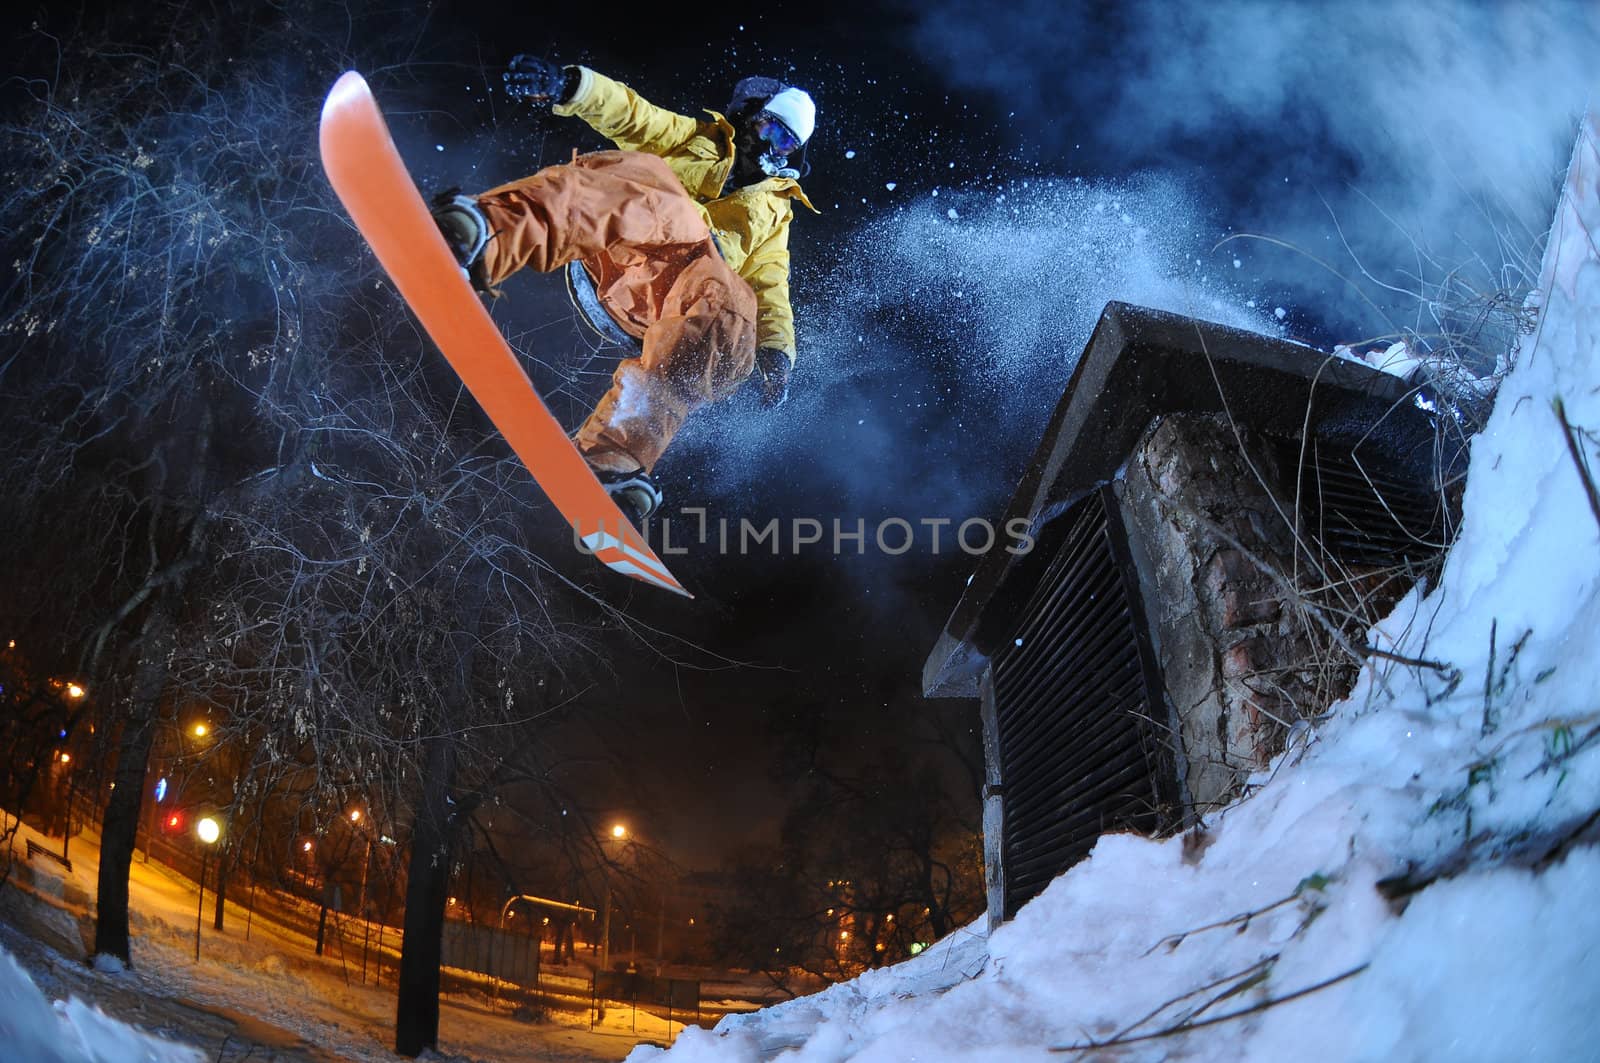 Jumping snowboarder in the city at night in winter by gravityimaging1